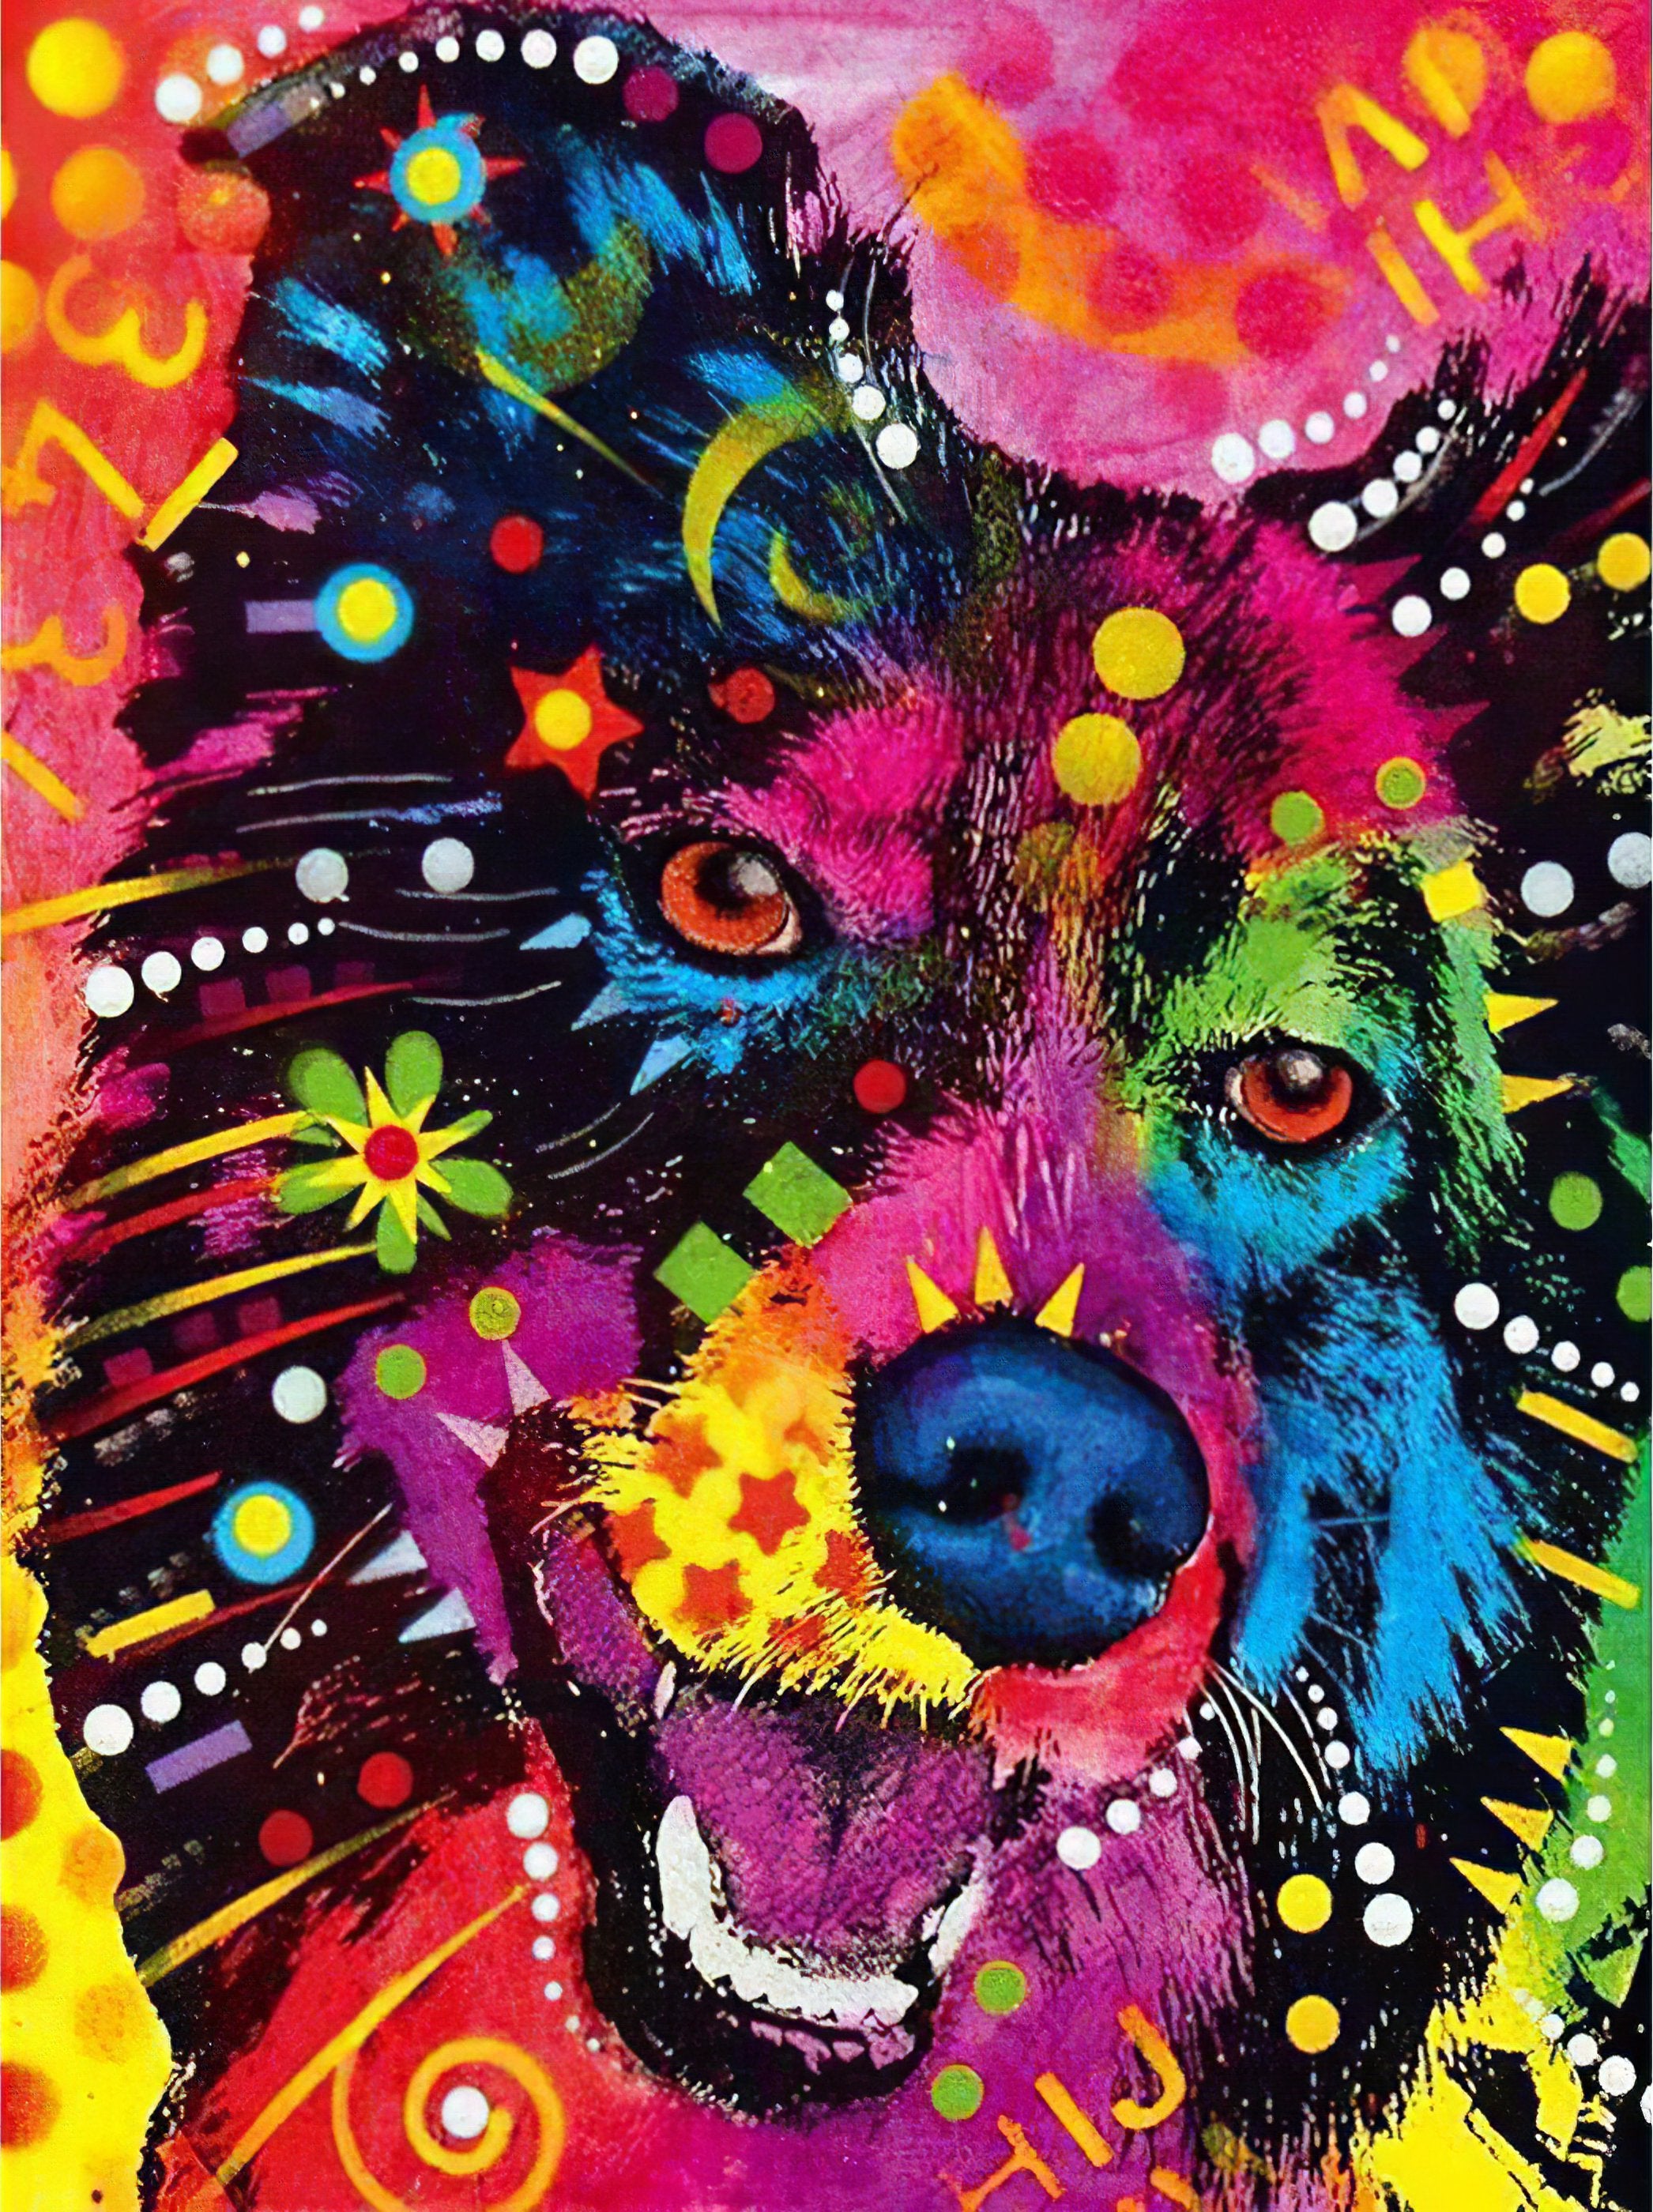 Meet the colorful dog, a burst of joy and color in every wag.Colored Dog - Diamondartlove